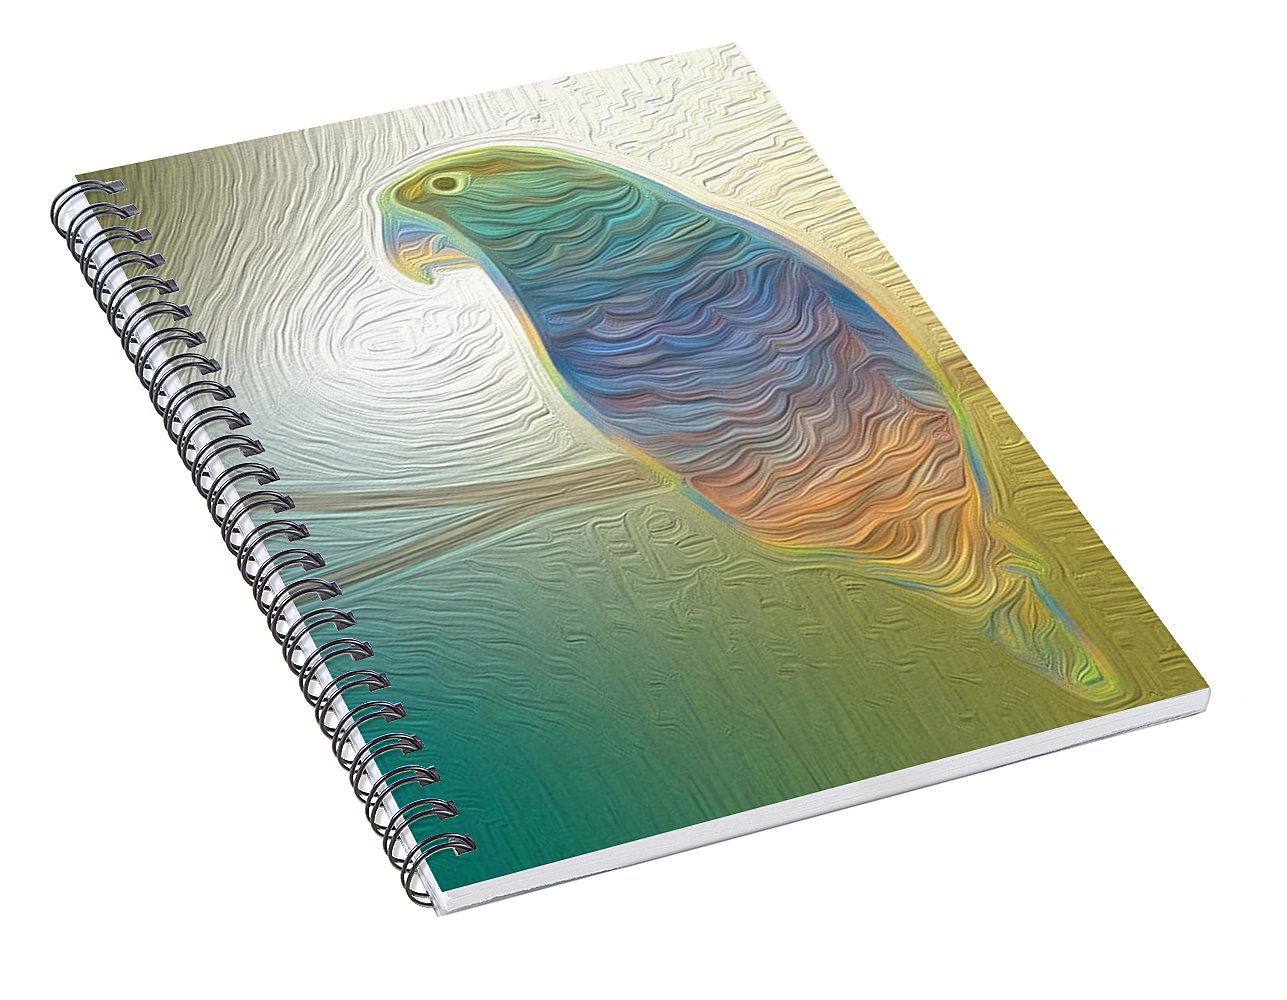 Perched Parrot - Spiral Notebook